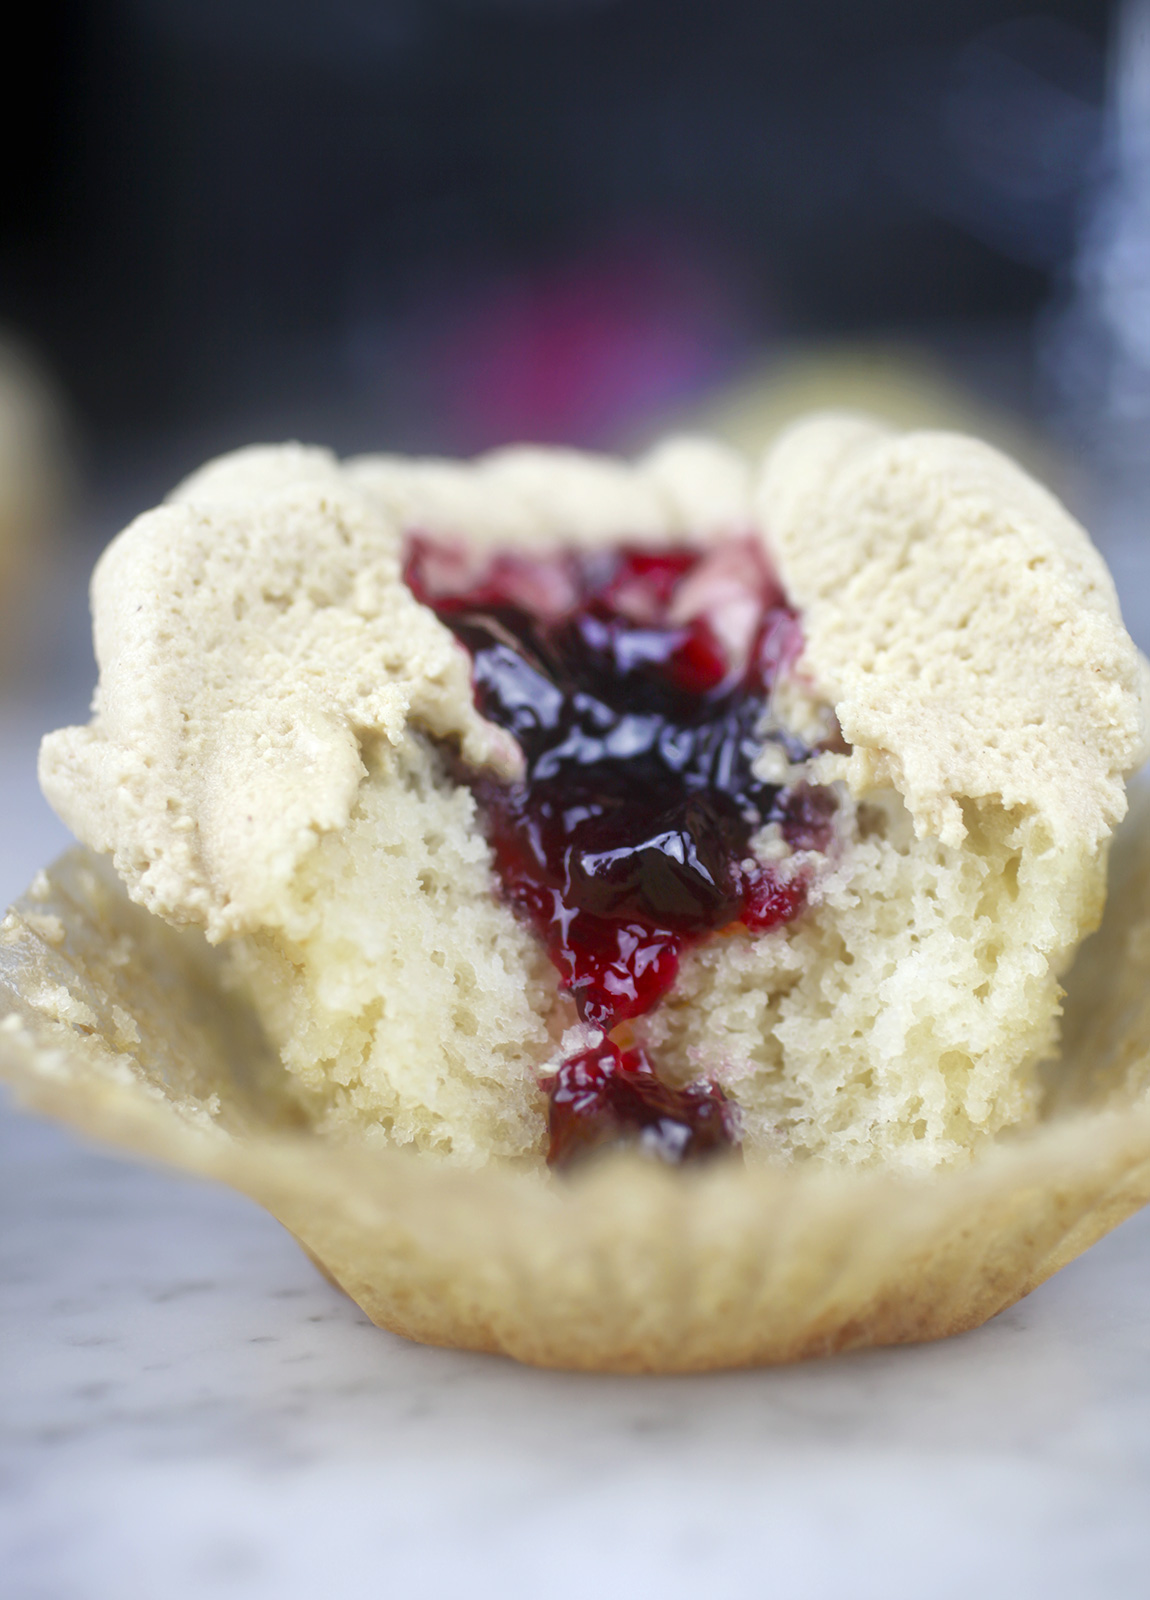 Peanut Butter and Jelly Cupcake